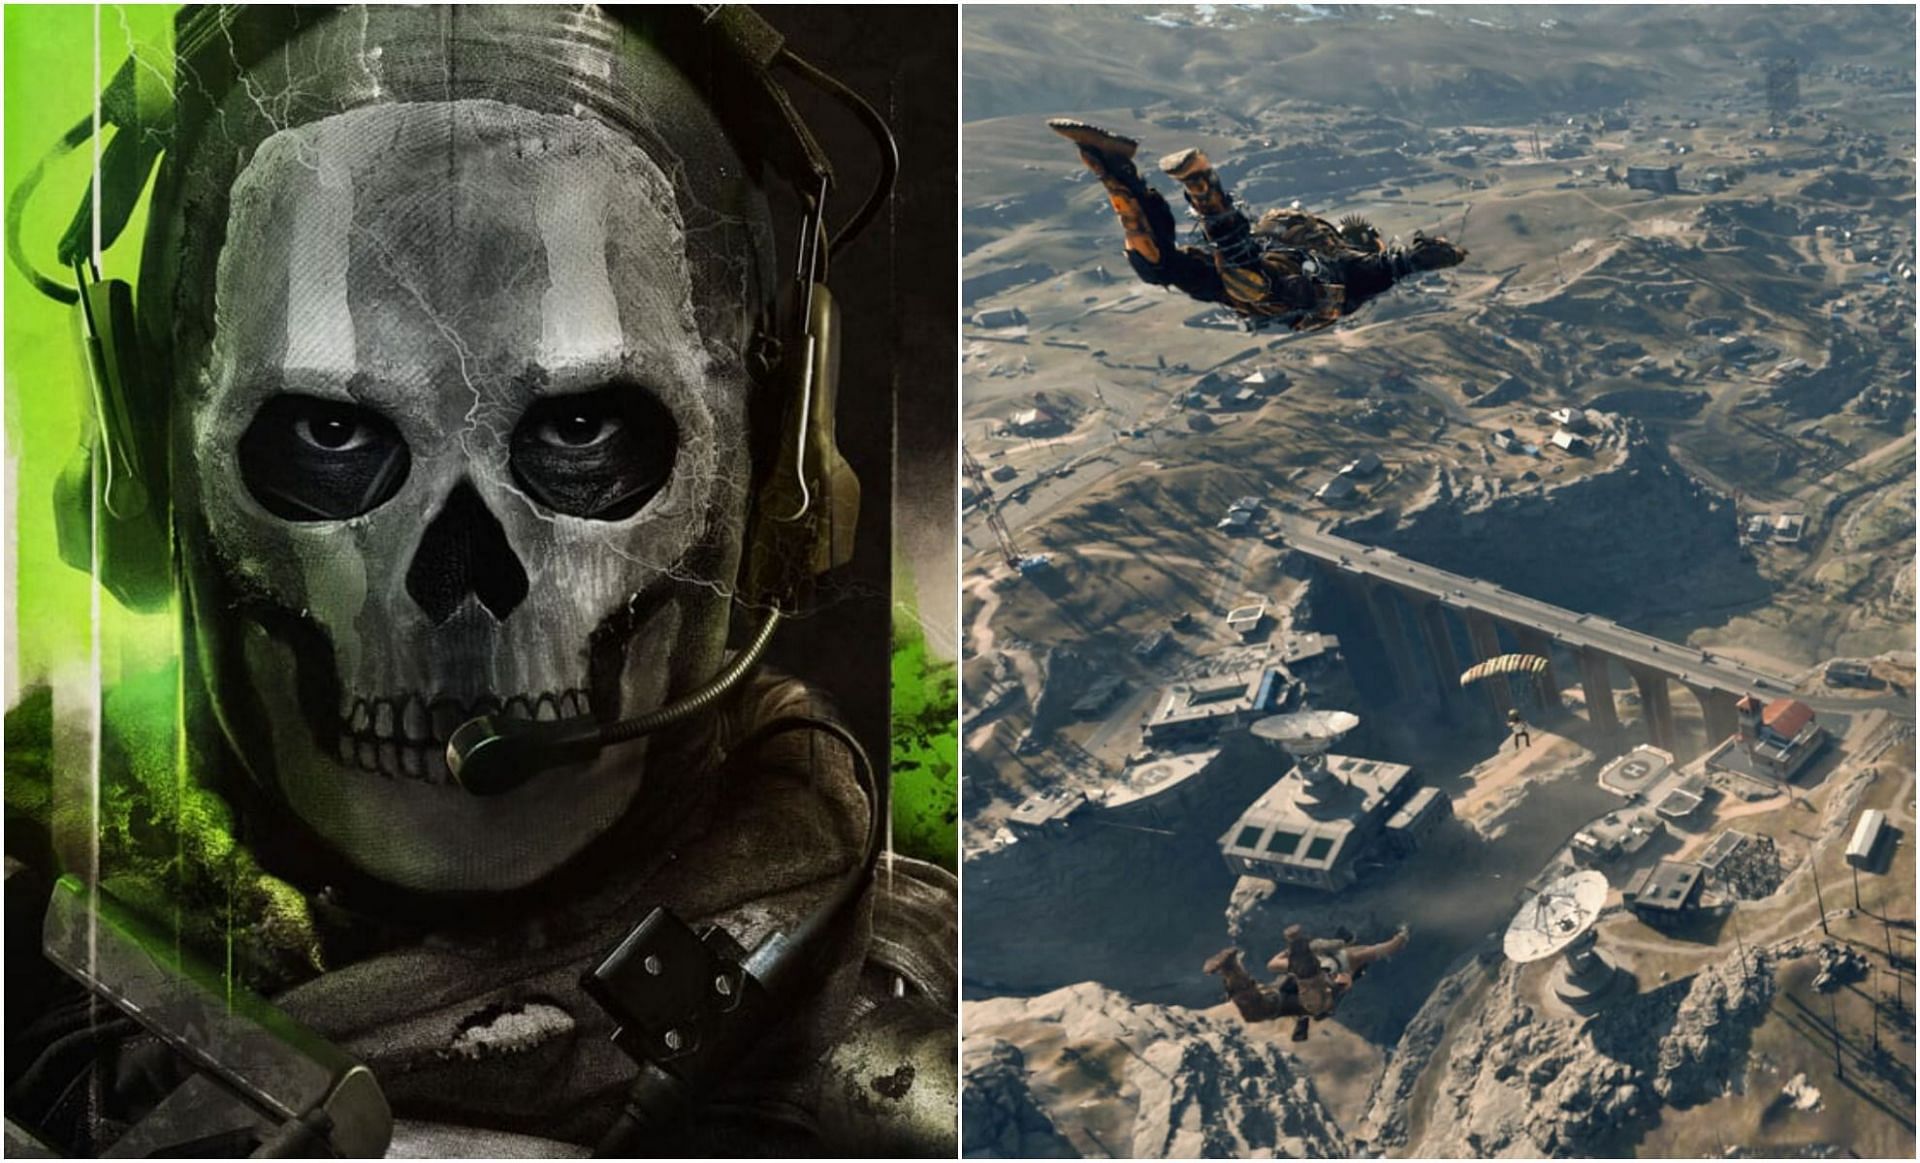 Modern Warfare 2 will get its Battle Royale mode soon after its release (Images via Activision)